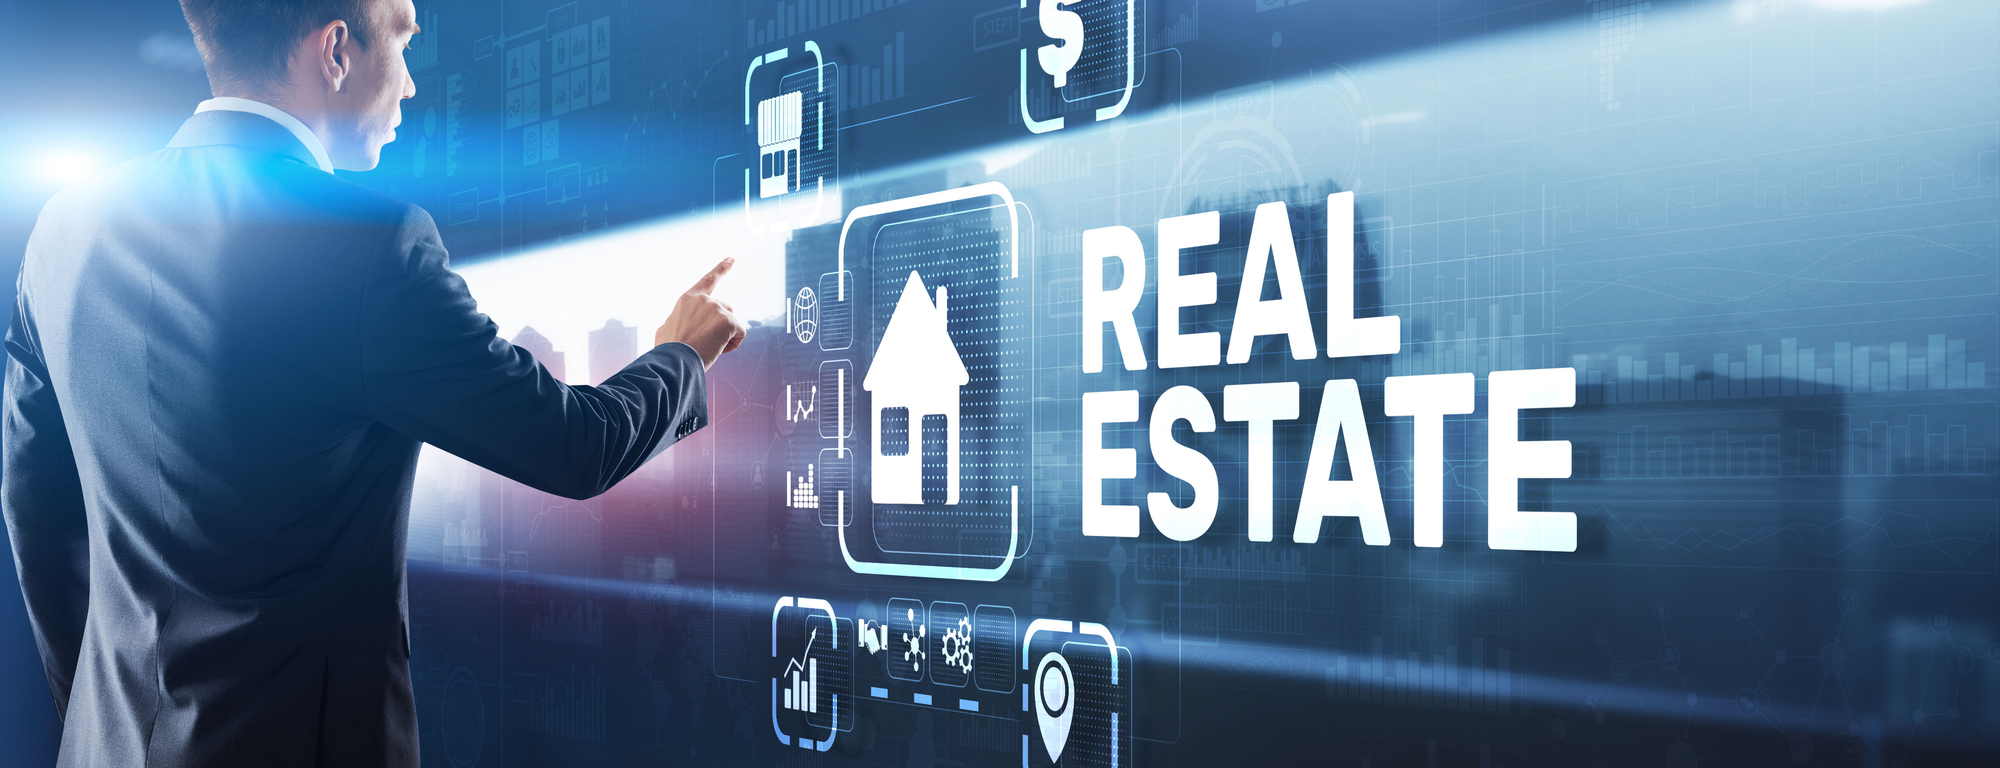 <p>Reviewing the list of <strong>income-producing assets</strong> backed by collateral, real estate typically features high. In fact, real estate is one of the best ways to <strong>build generational wealth</strong>.</p><p>However, <strong>investing in real estate</strong> usually requires money. Typically, you need at least a 25% down payment for buying a rental property. Often individuals wonder how to invest in real estate with little or no money. </p><p>Your lack of funds will have to be made up by sweat equity or adjustments in your lifestyle. After all, there is no free lunch. Let's get started!</p>